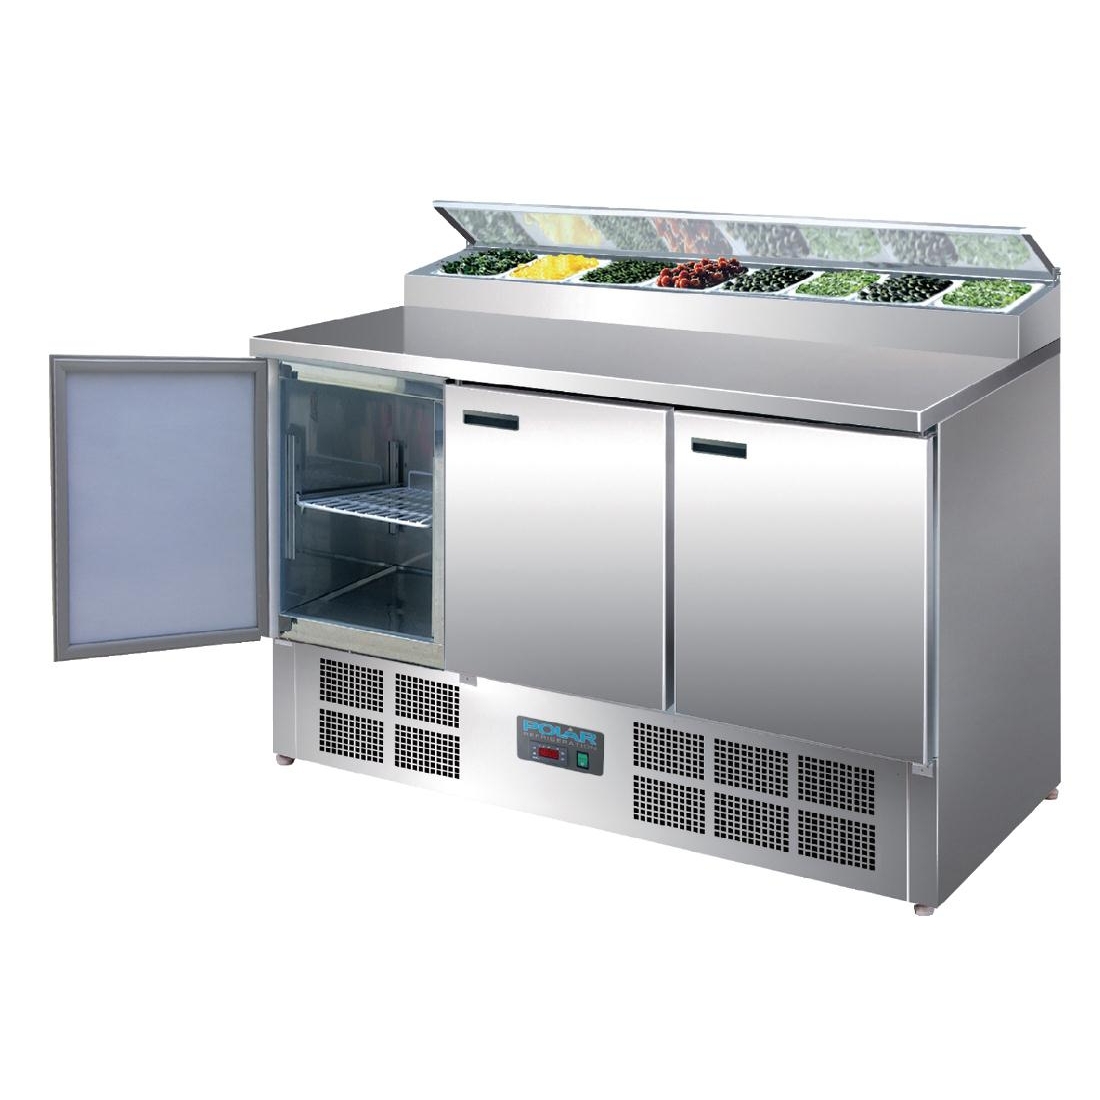 Polar Refrigerated Pizza And Salad Prep Counter 390ltr By Polar